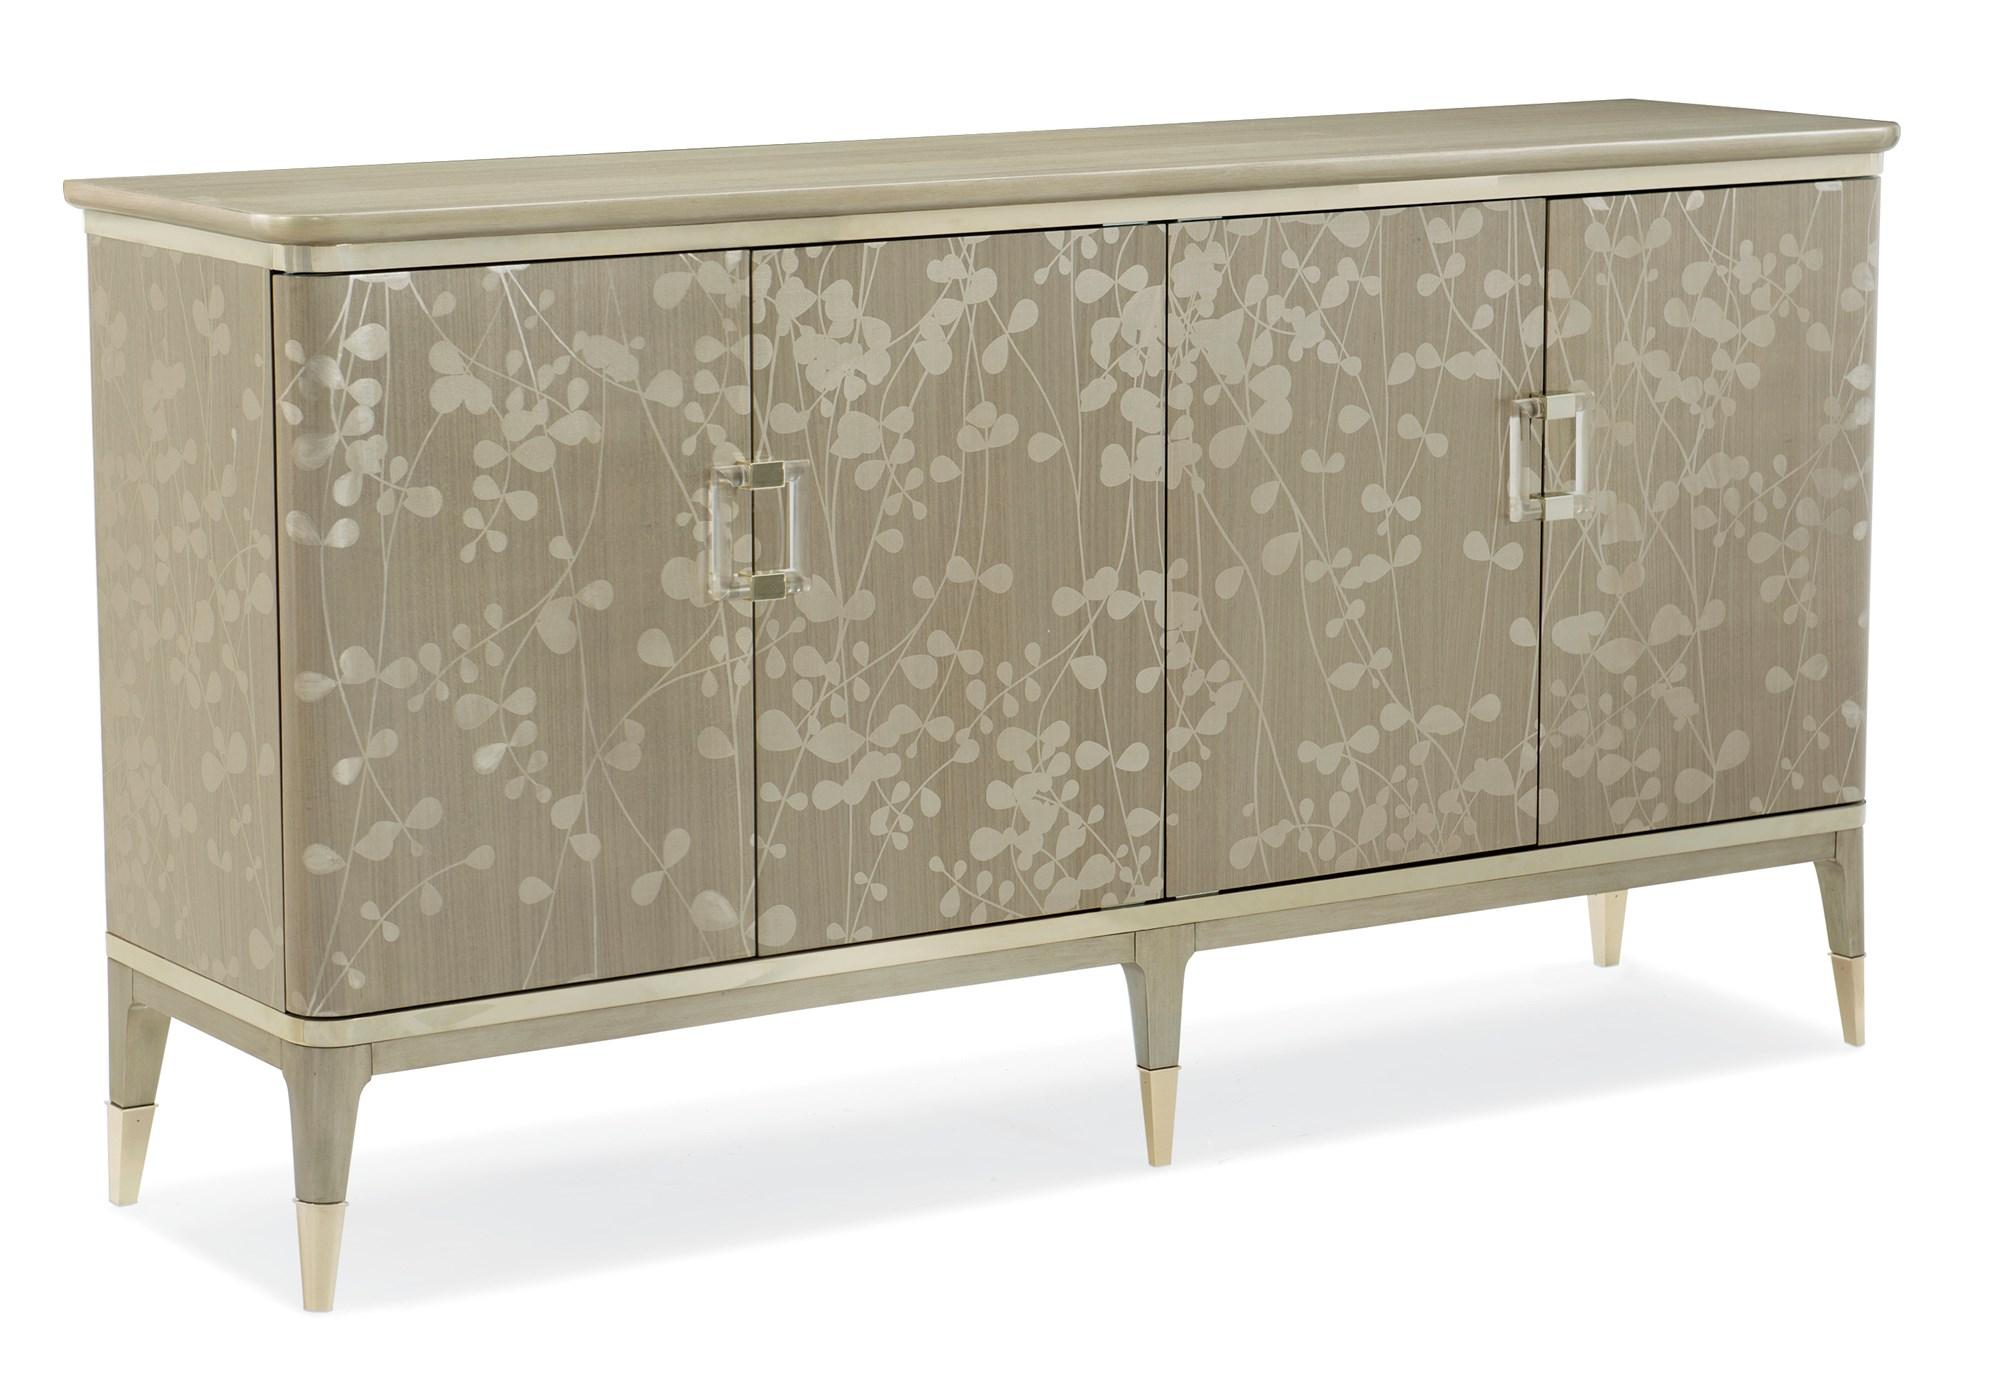 Contemporary Buffet TURN A NEW LEAF CLA-016-212 in Champagne 